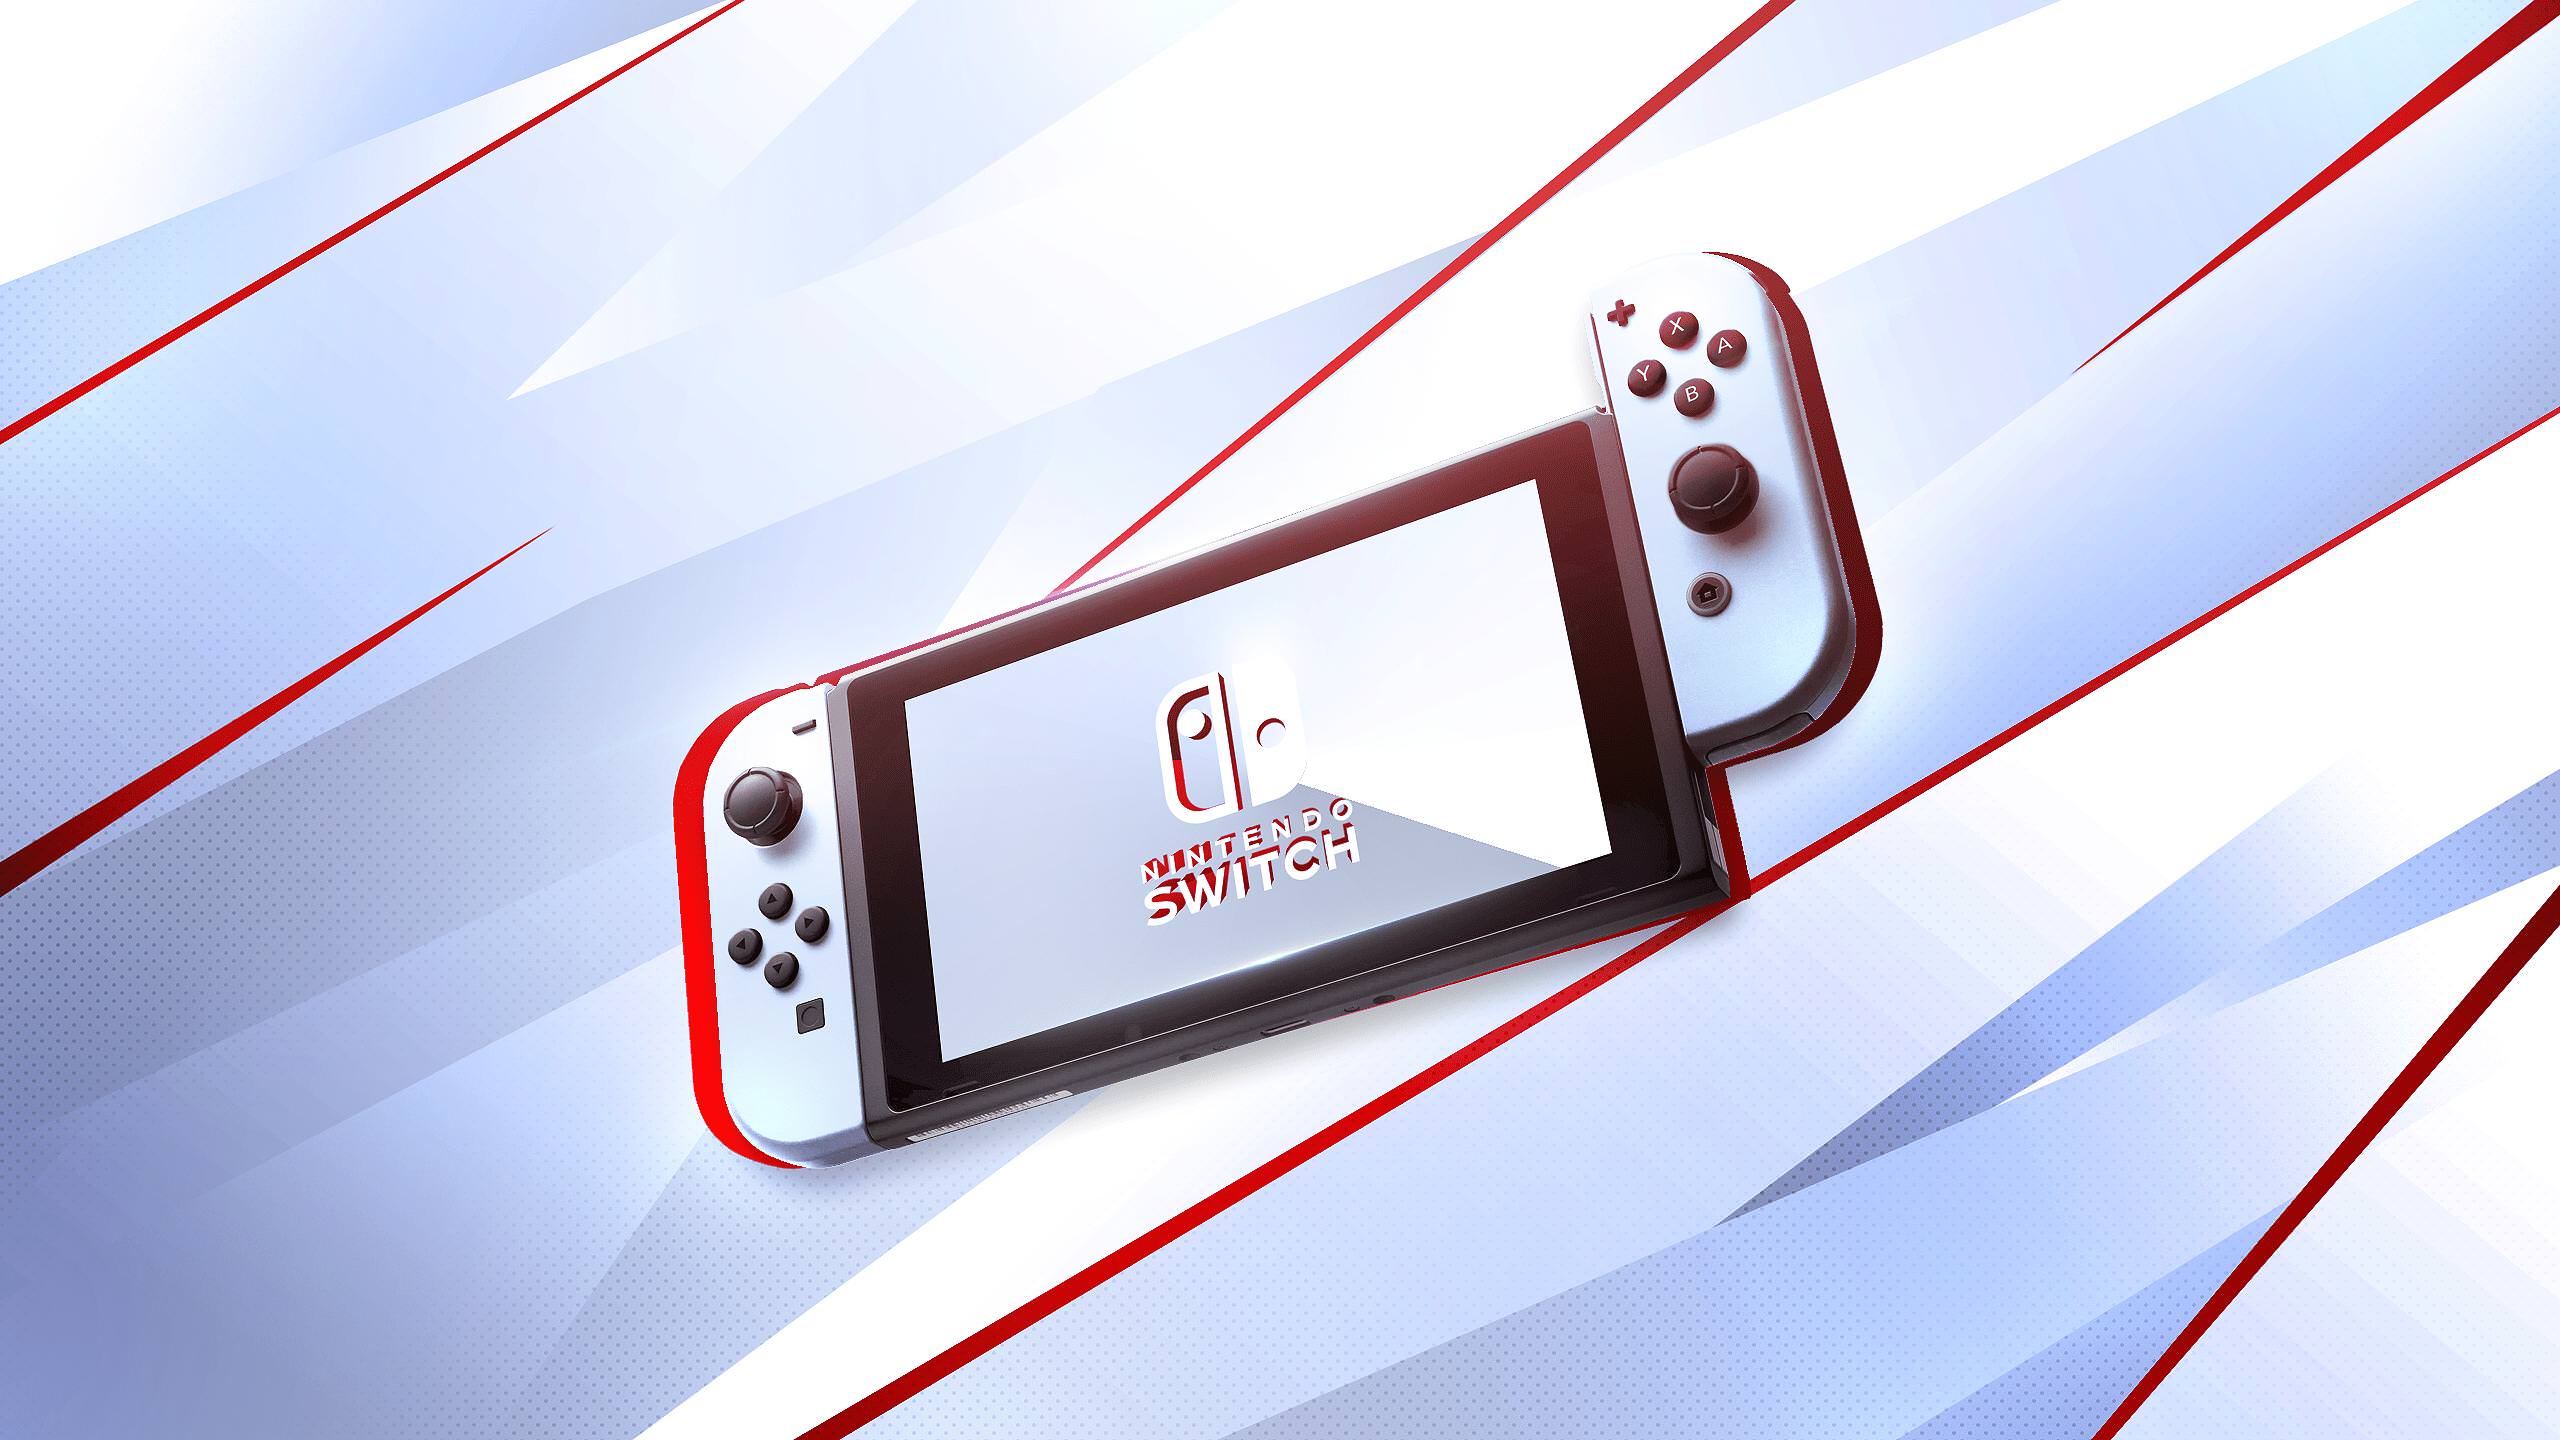 Made this Switch desktop wallpaper today!